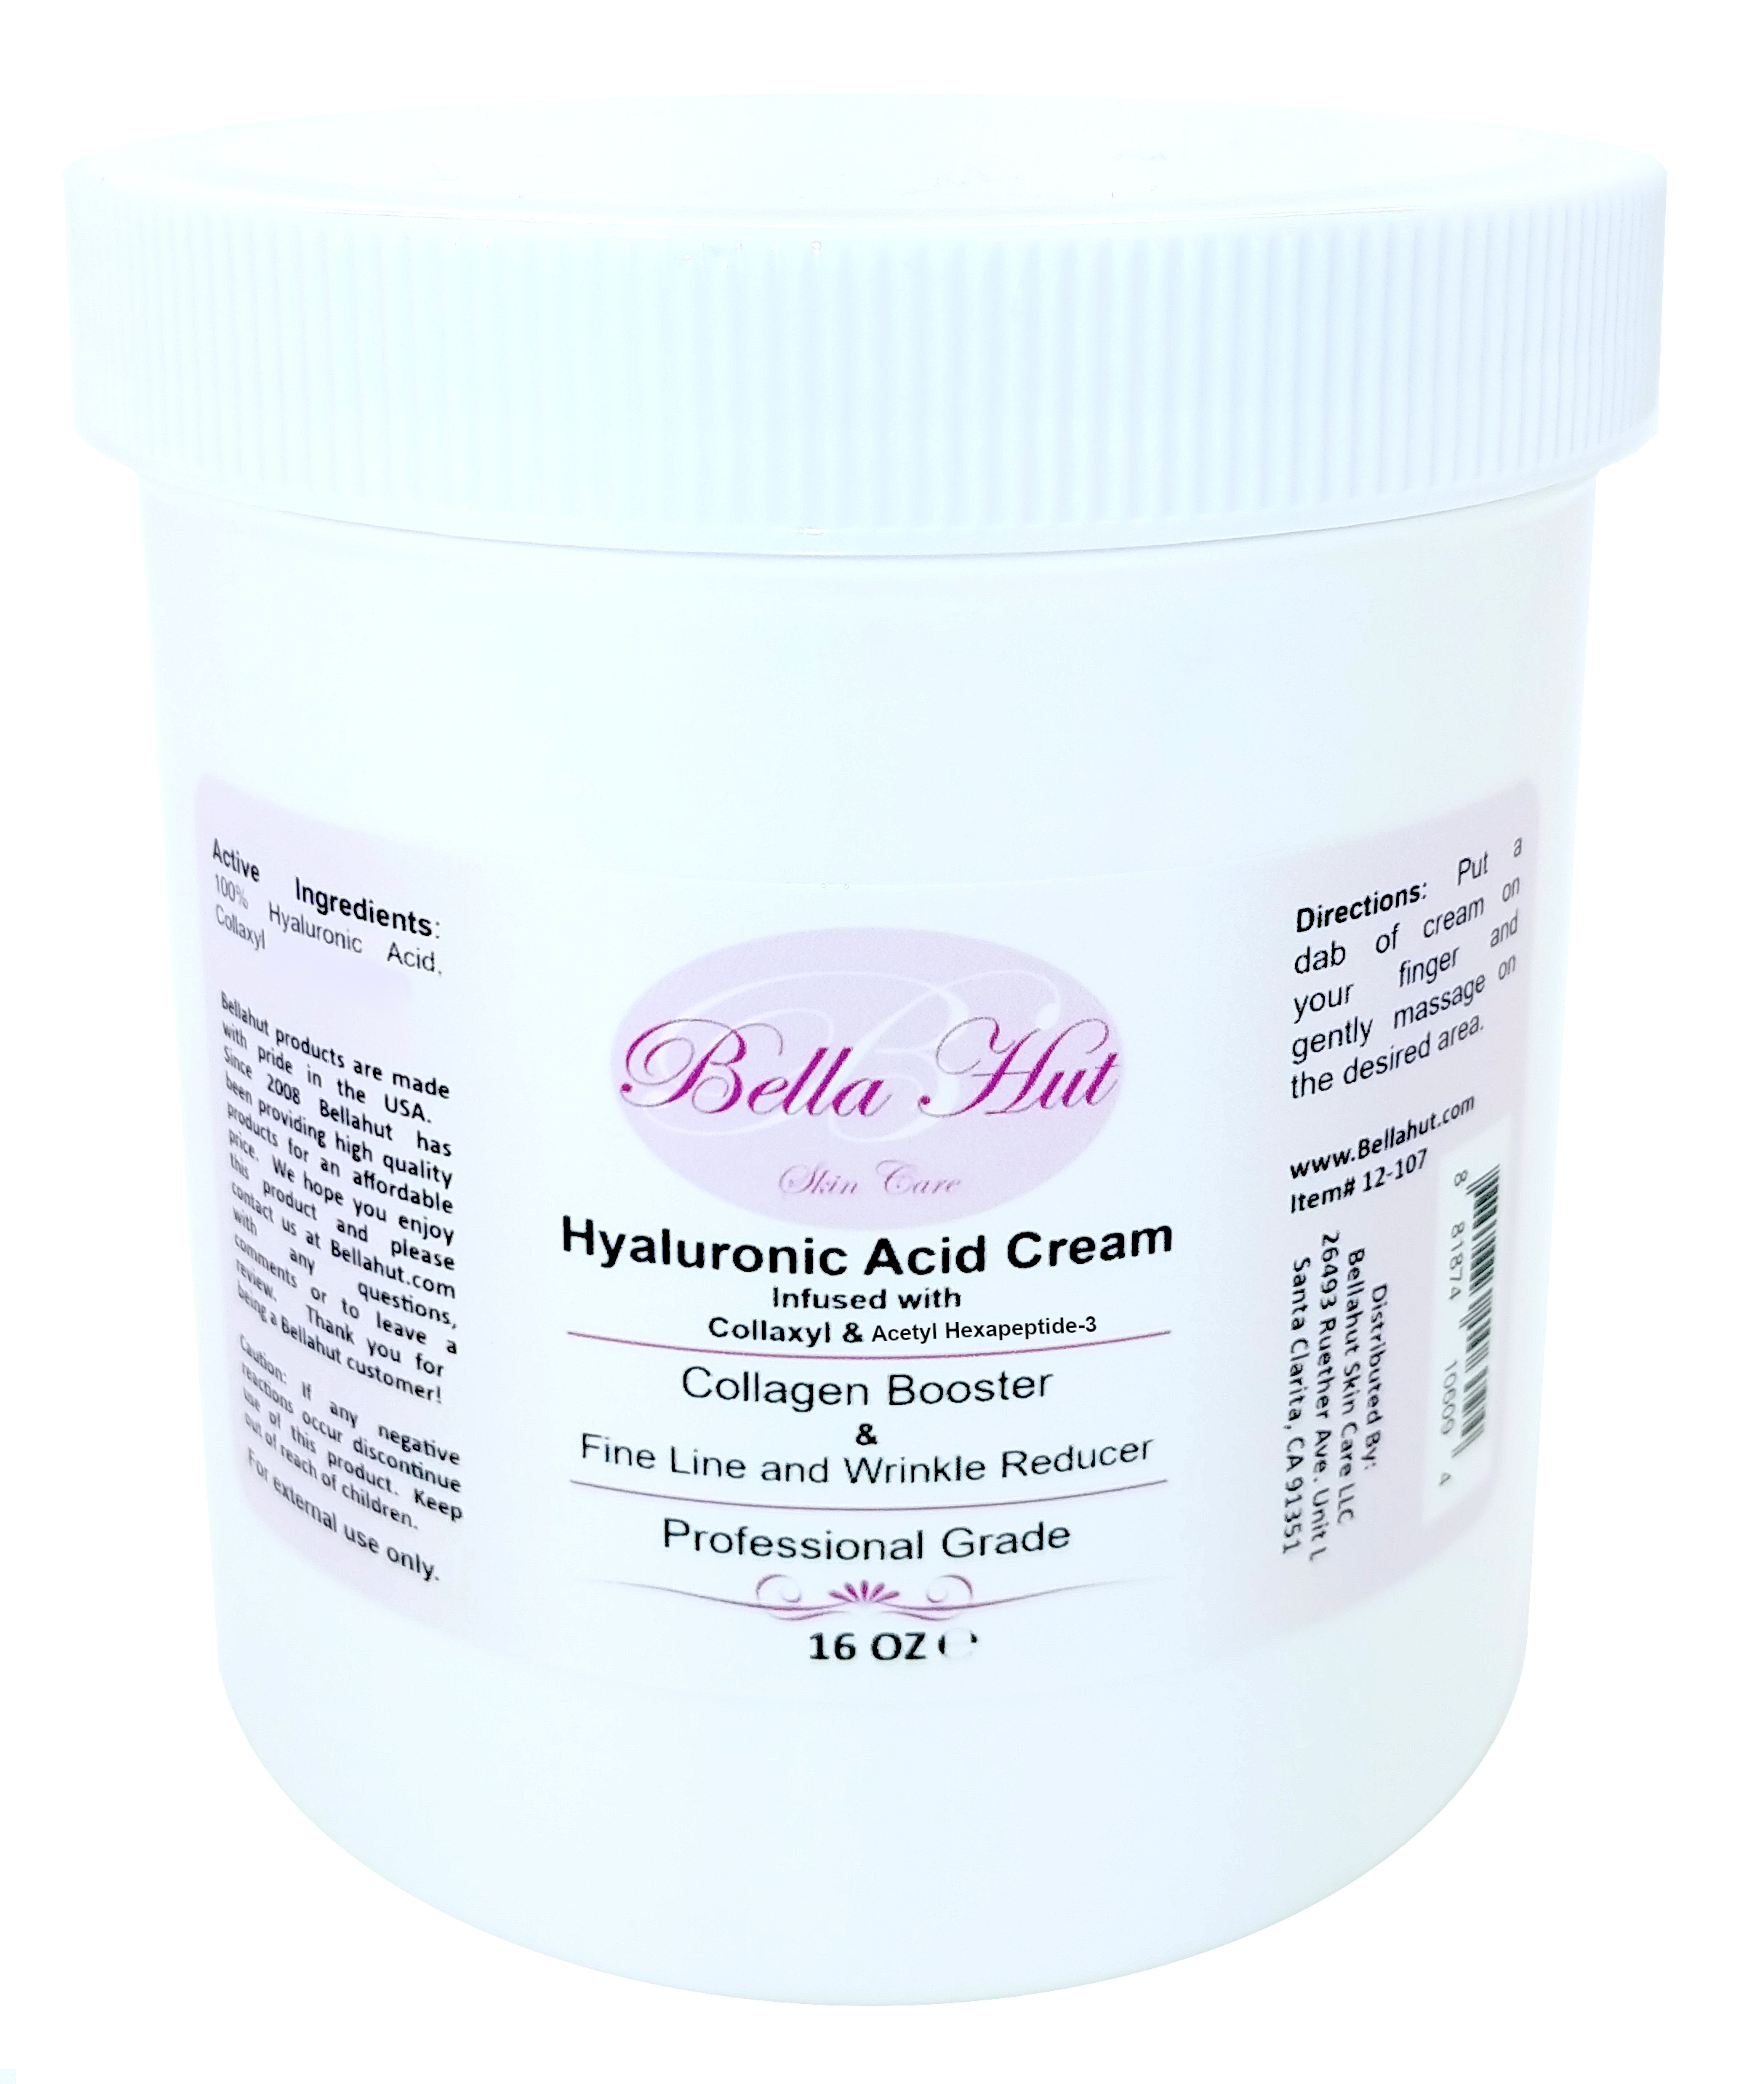 100% Hyaluronic Acid Cream with Collaxyl and Acetyl hexapeptide-3 